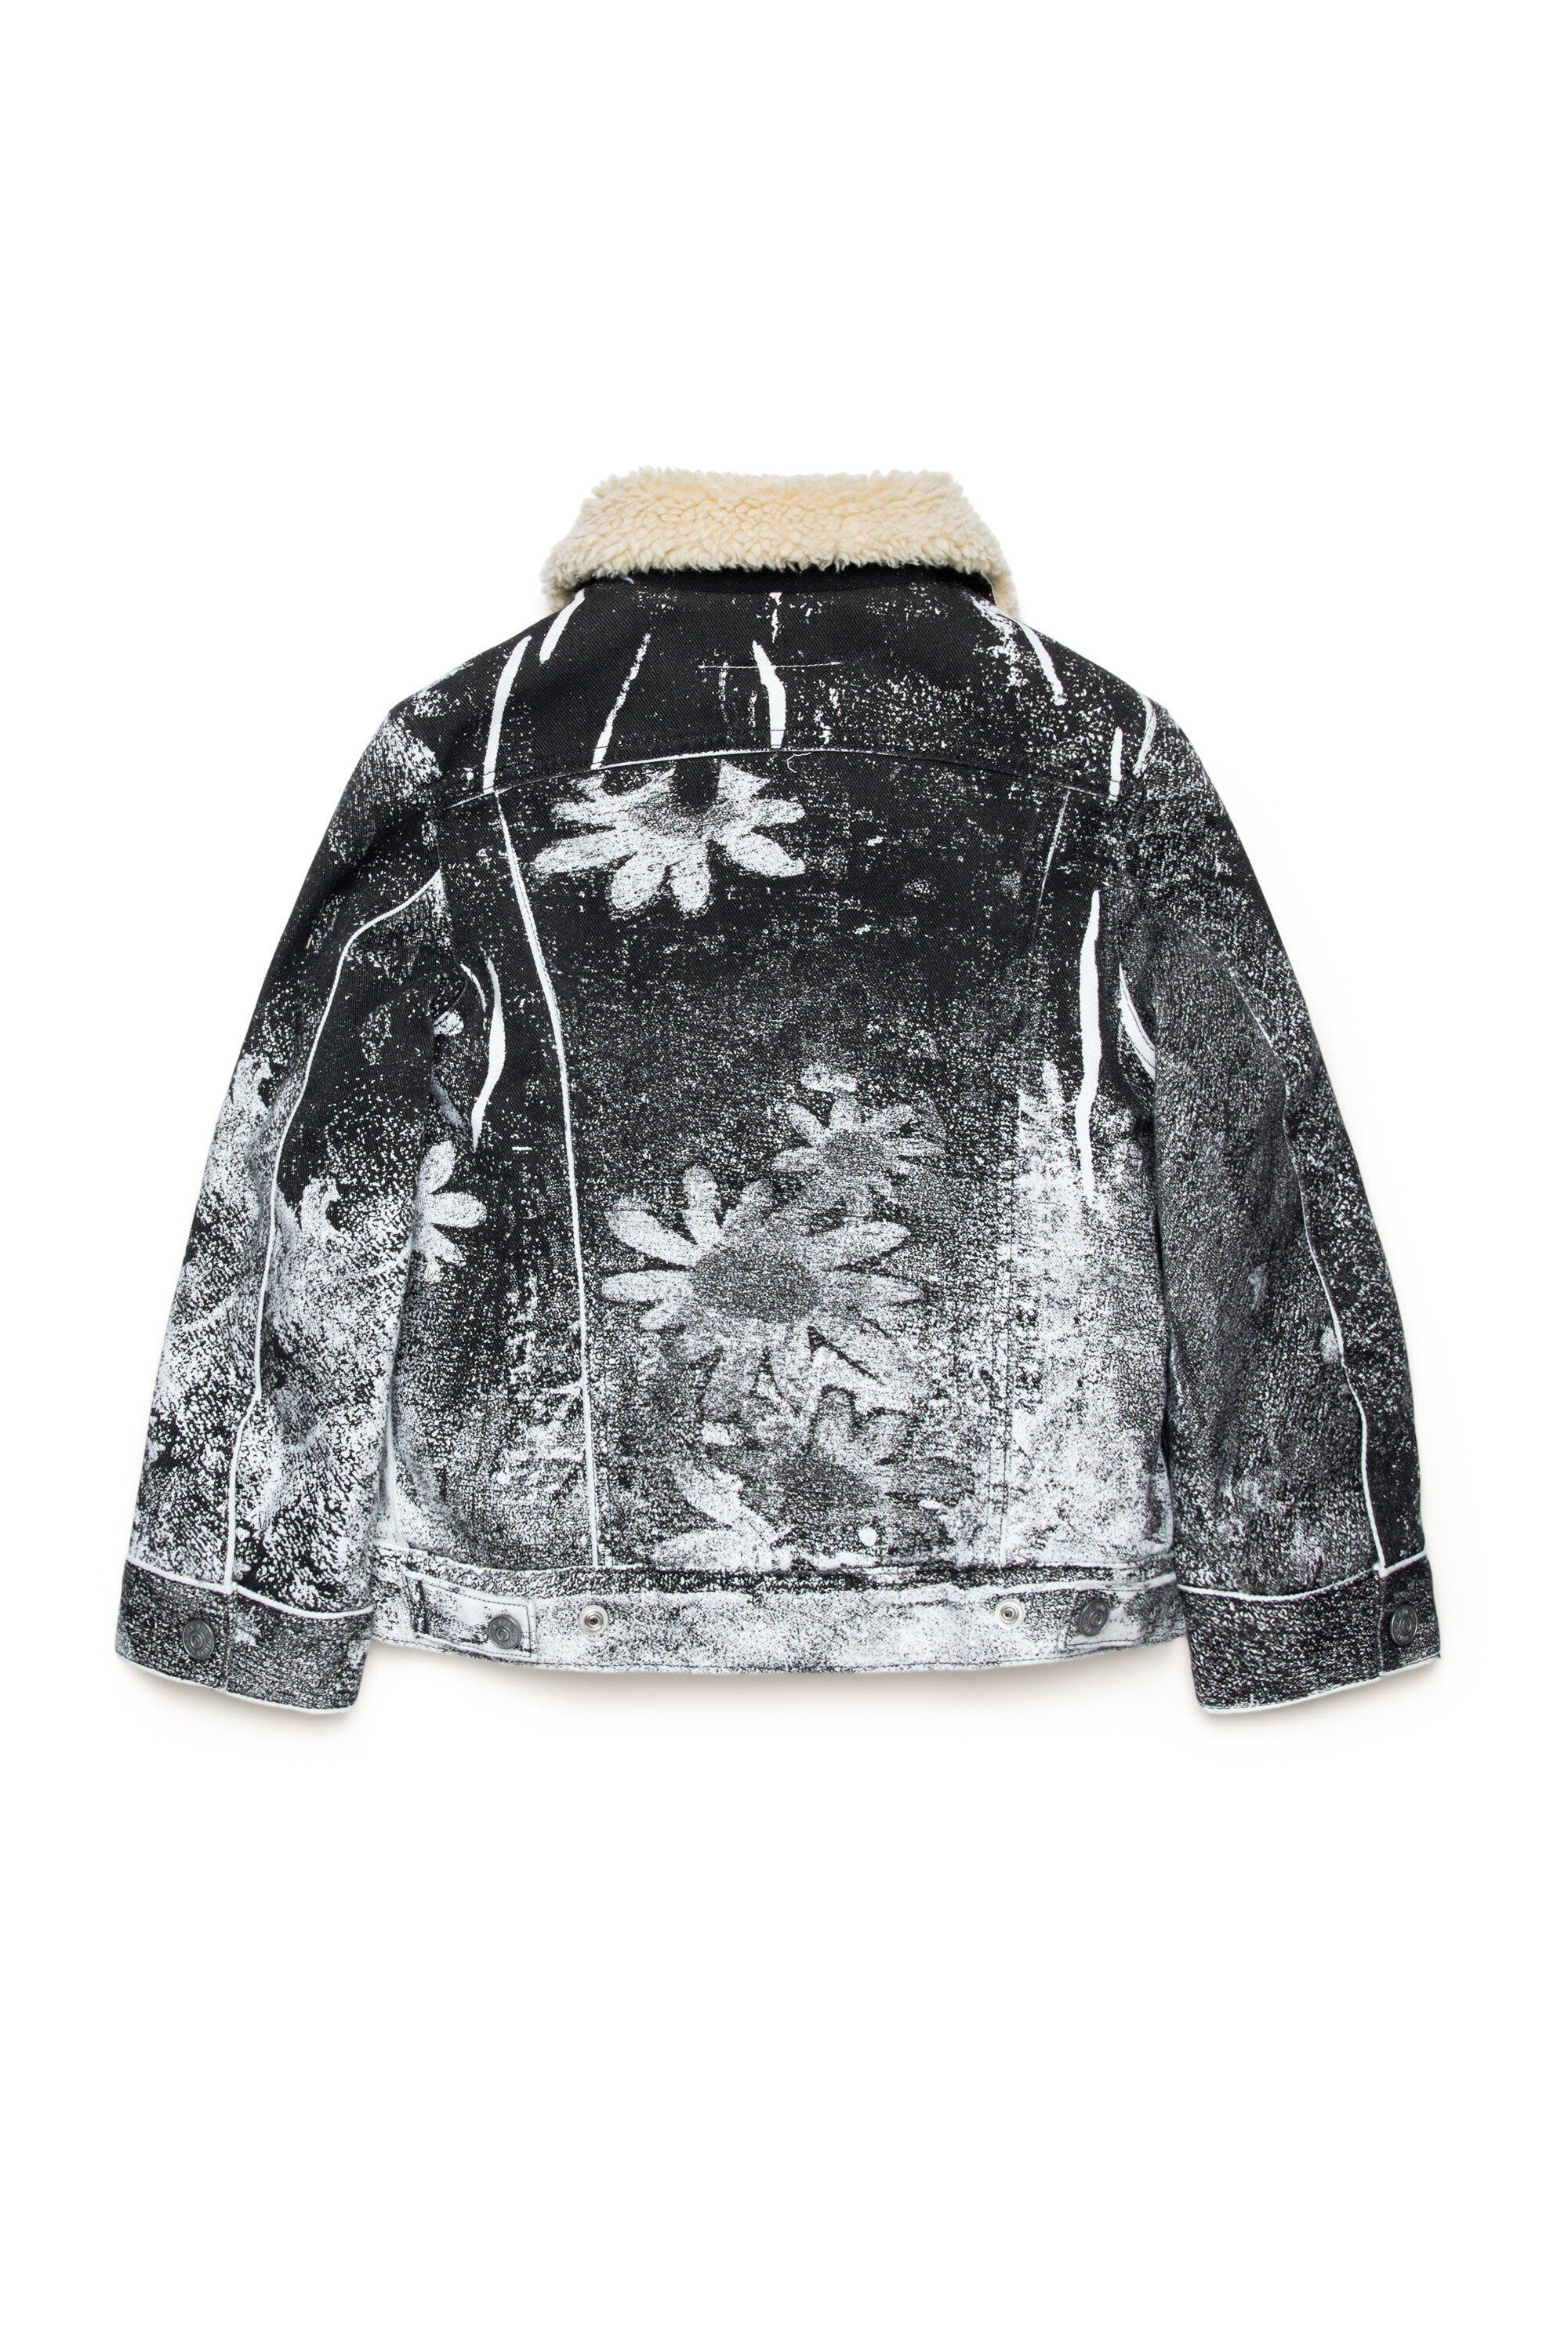 All-over floral teddy jacket with inserts